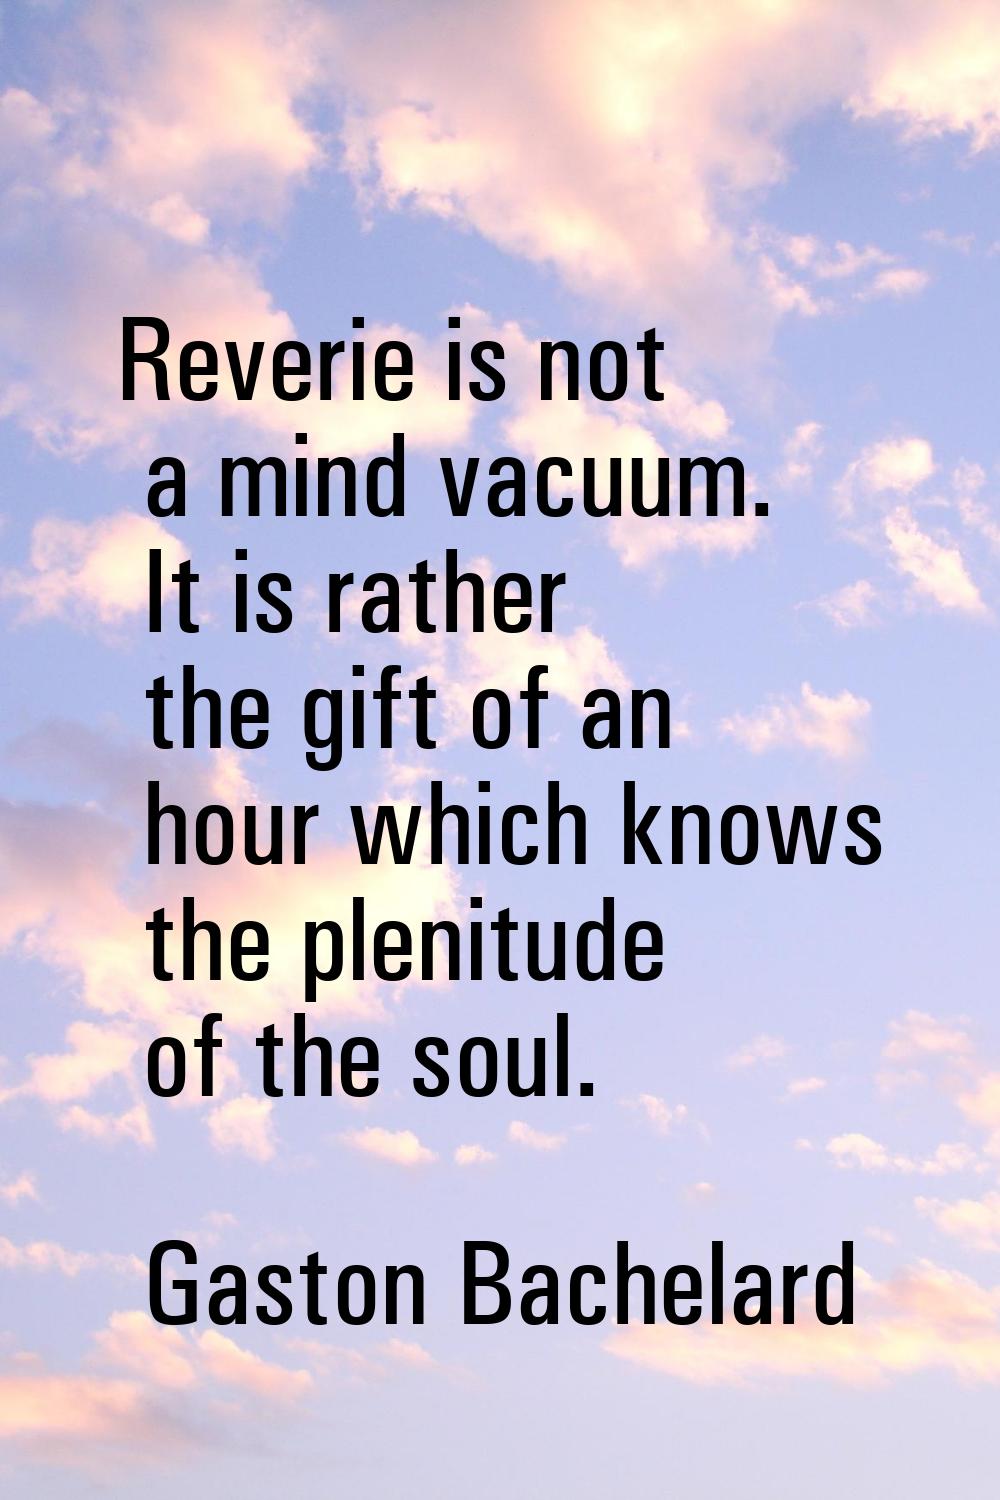 Reverie is not a mind vacuum. It is rather the gift of an hour which knows the plenitude of the sou